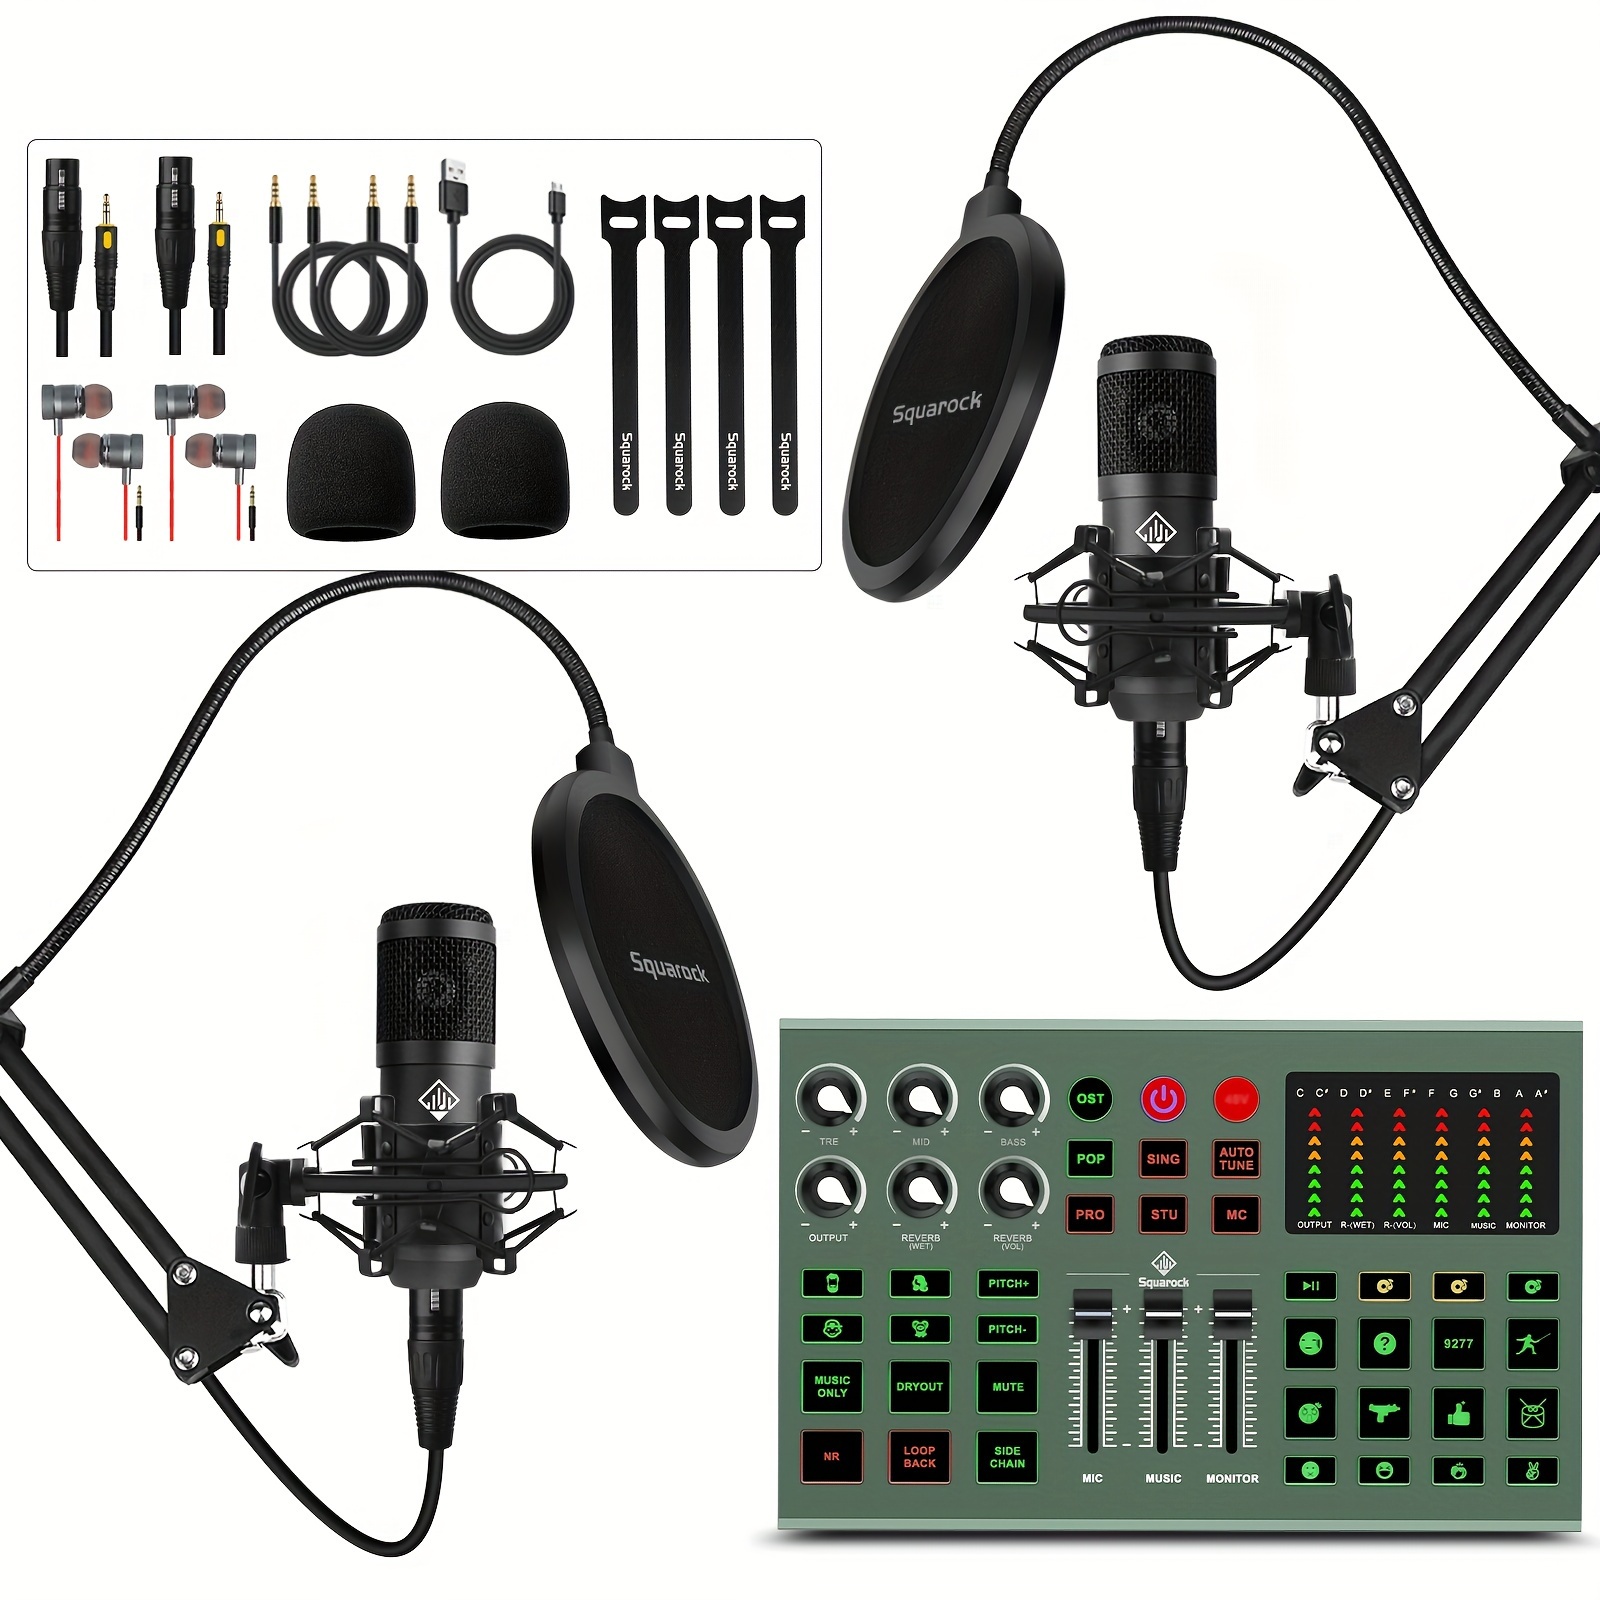 

Podcast Equipment Bundle For 2 - Audio Interface Dj Mixer With Podcast Microphone Audio Mixer For Live Streaming Recording Interview